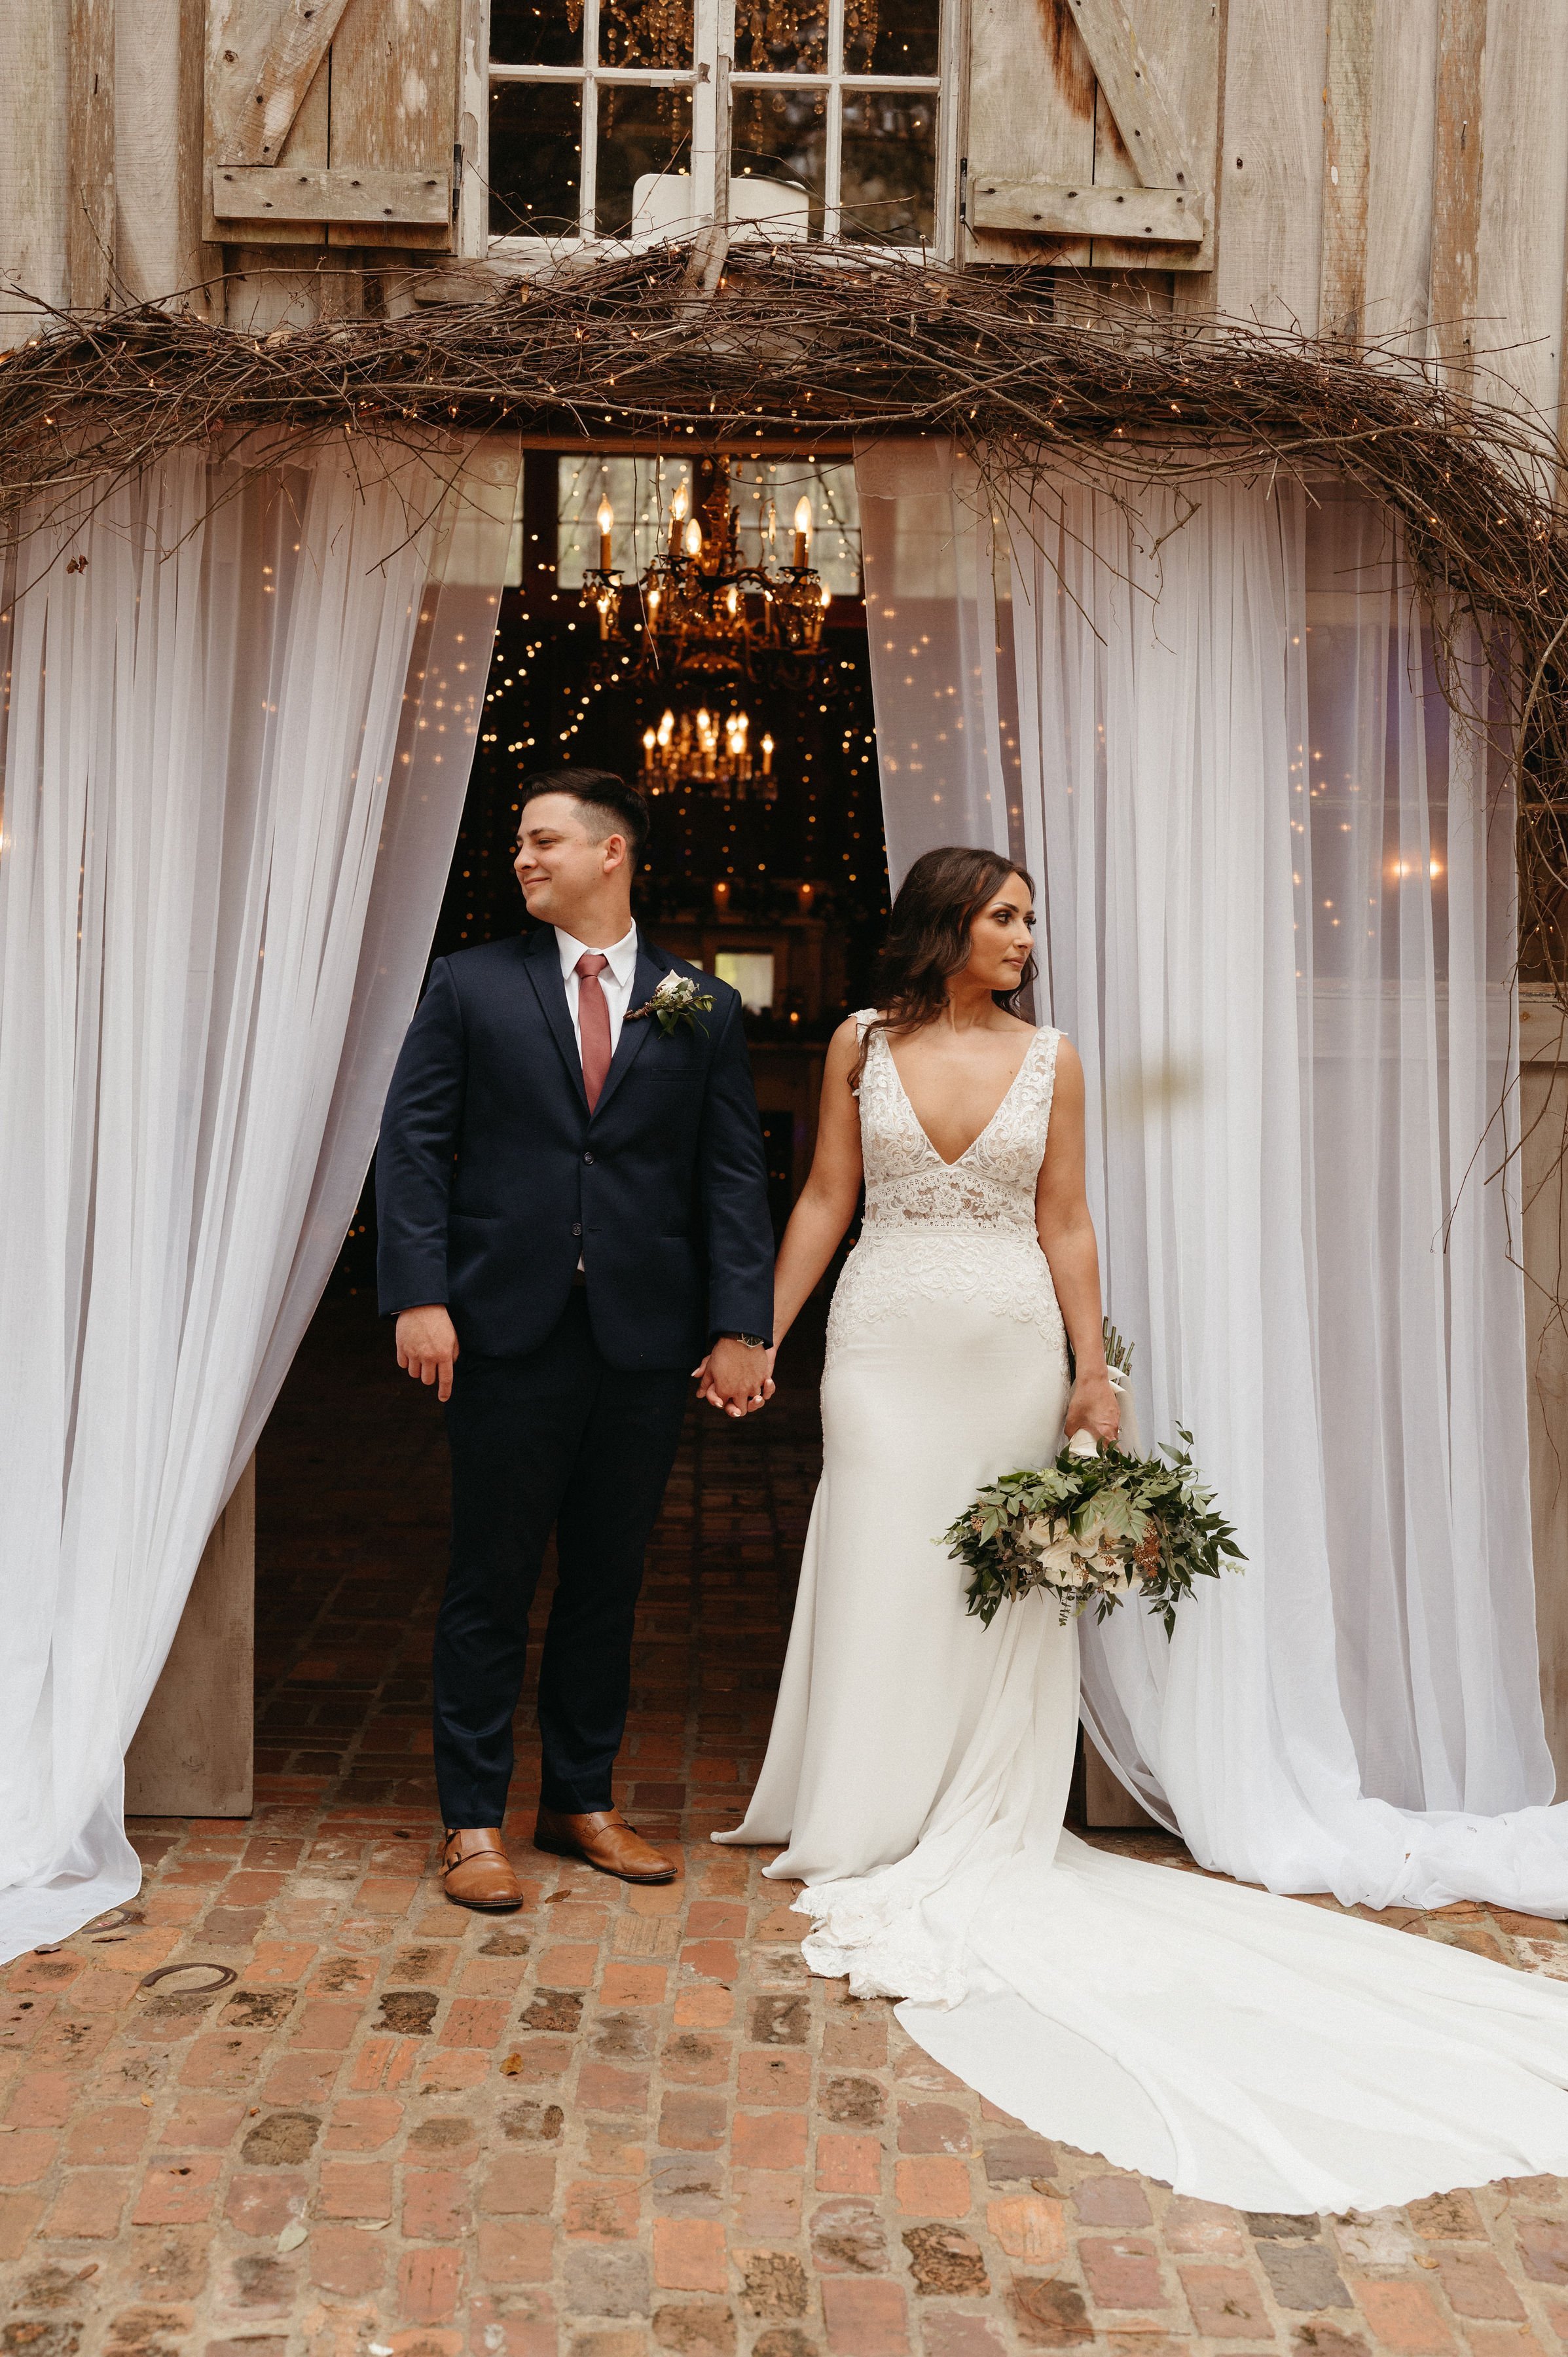 ivory-and-beau-blog-down-for-the-gown-lorren-real-bride-southern-bride-maggie-sottero-wedding-dress-made-with-love-bridal-wings-savannah-bridal-shop-savannah-bridal-boutique-savannah-georgia-The_Buie_Barn_Hall_Wedding_March_2022-39.jpg